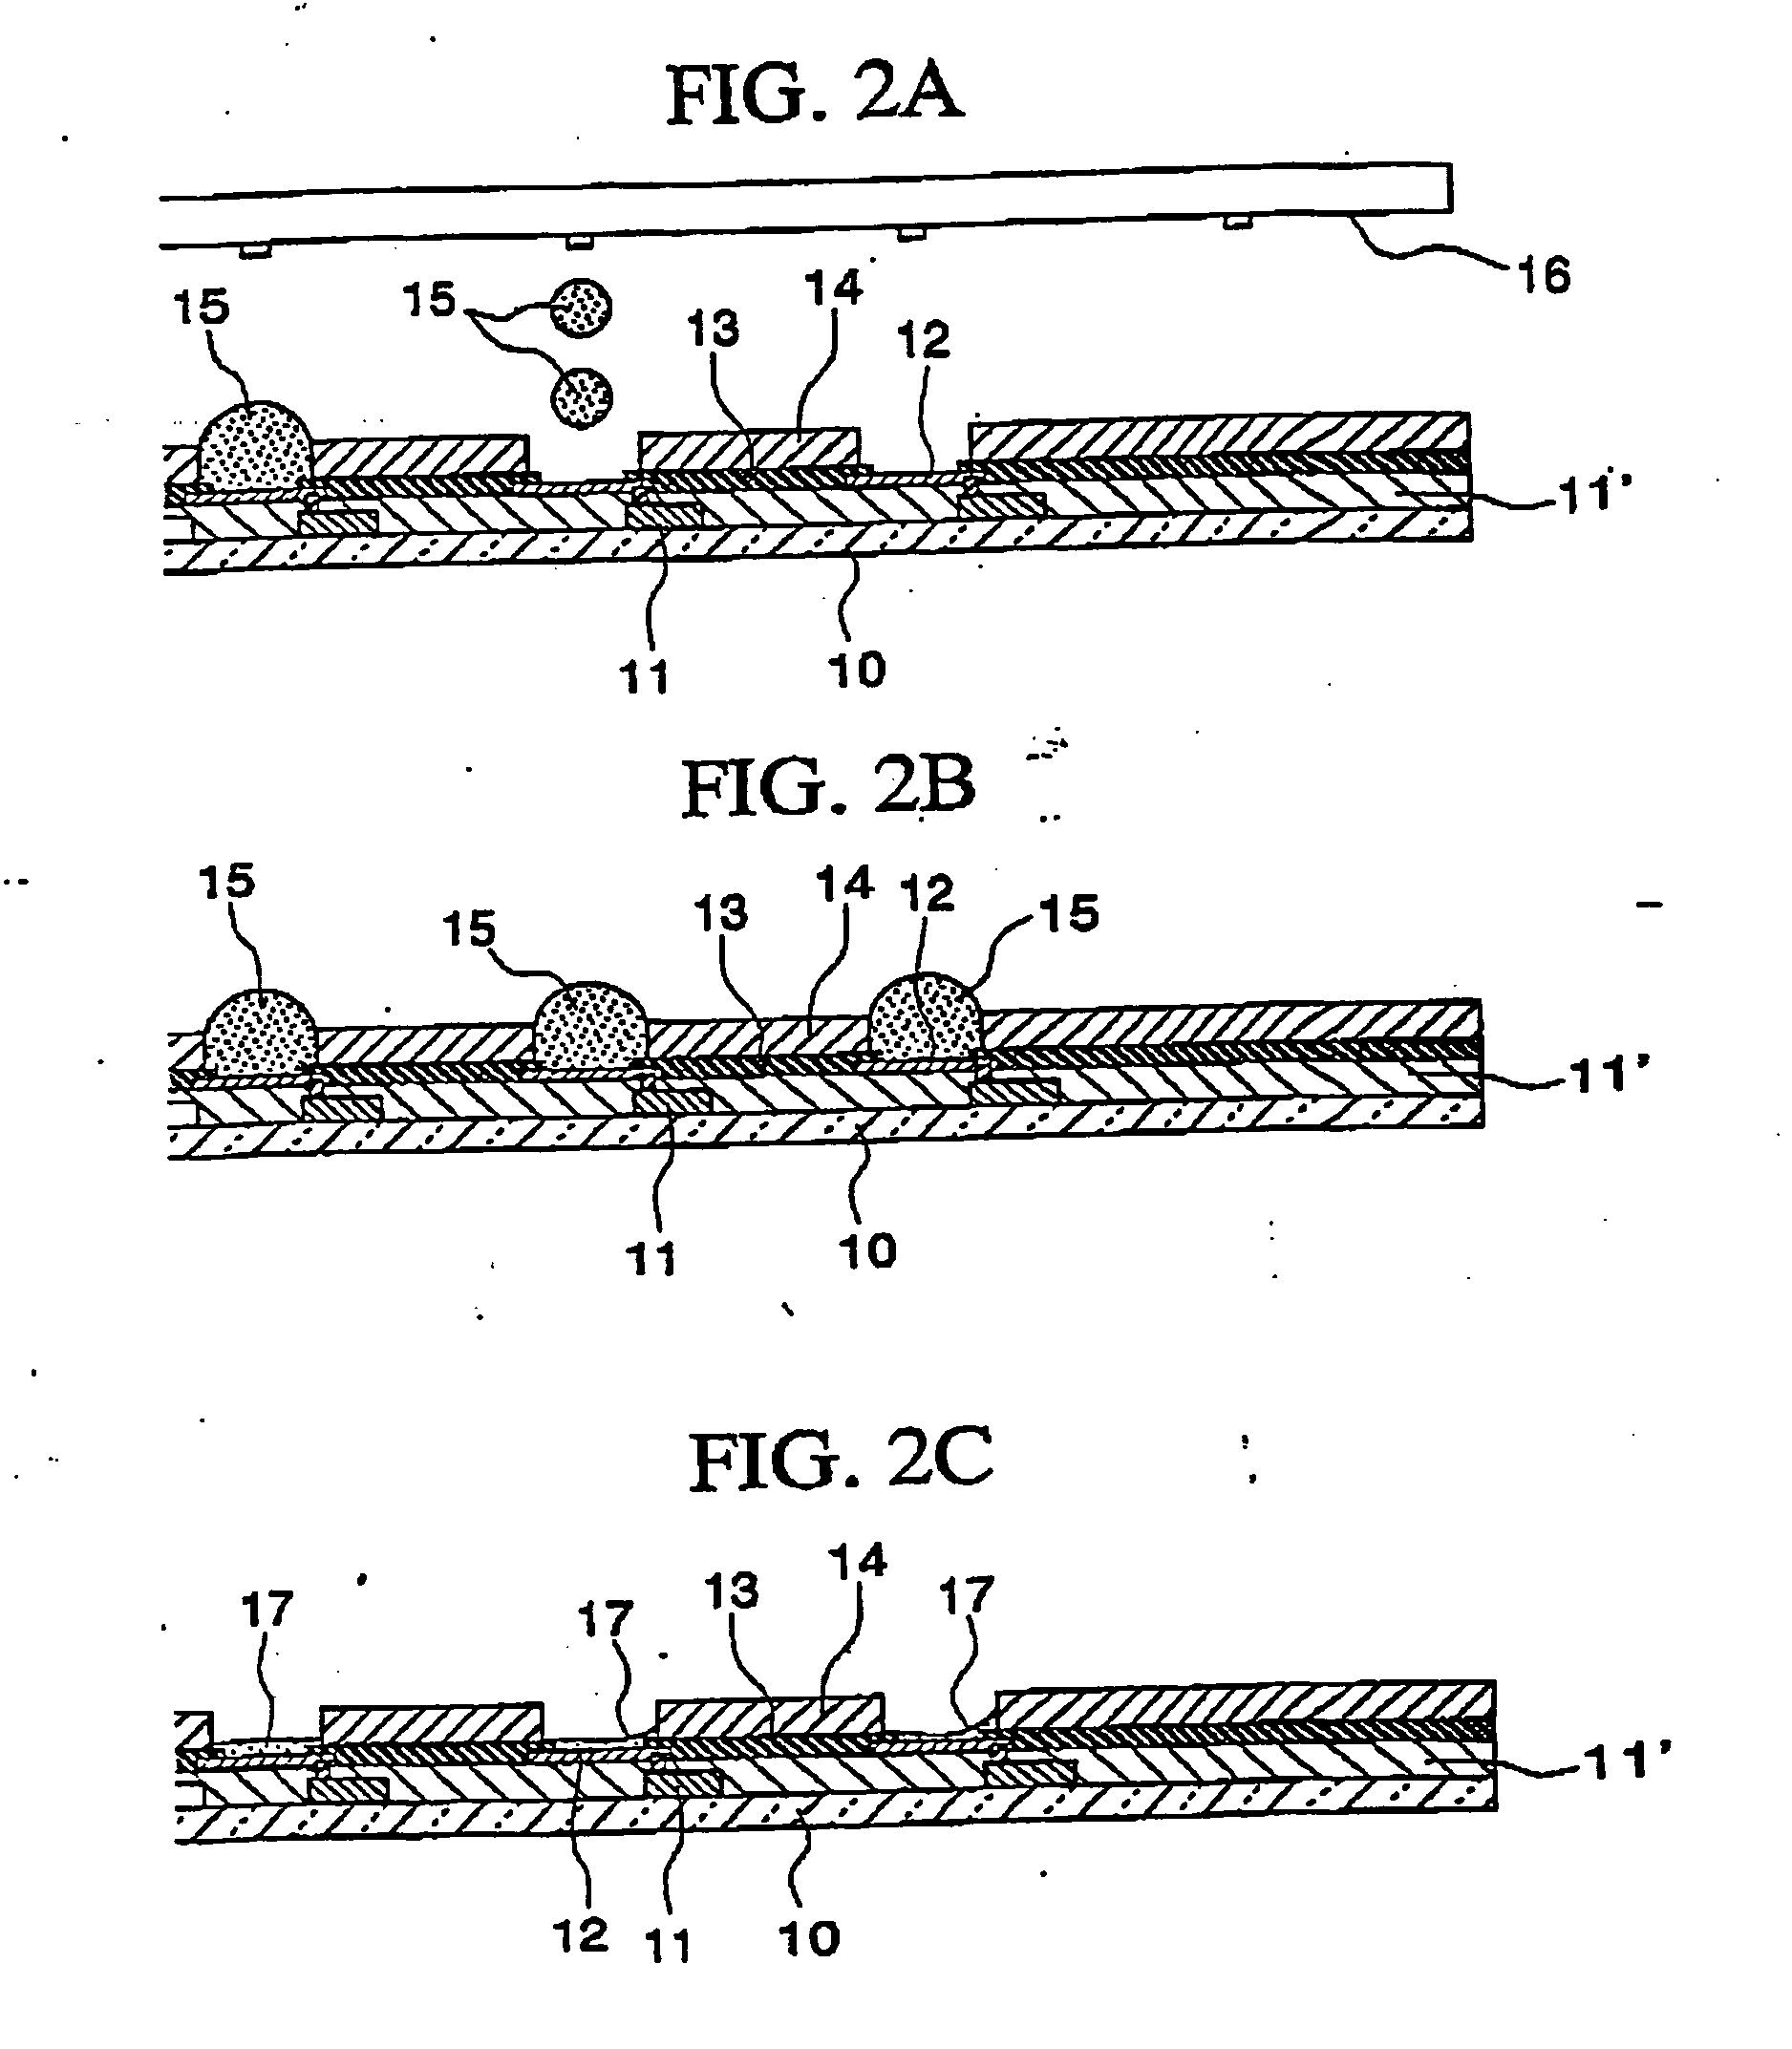 Organic electroluminescent device, manufacturing method therefor, and electronic devices therewith